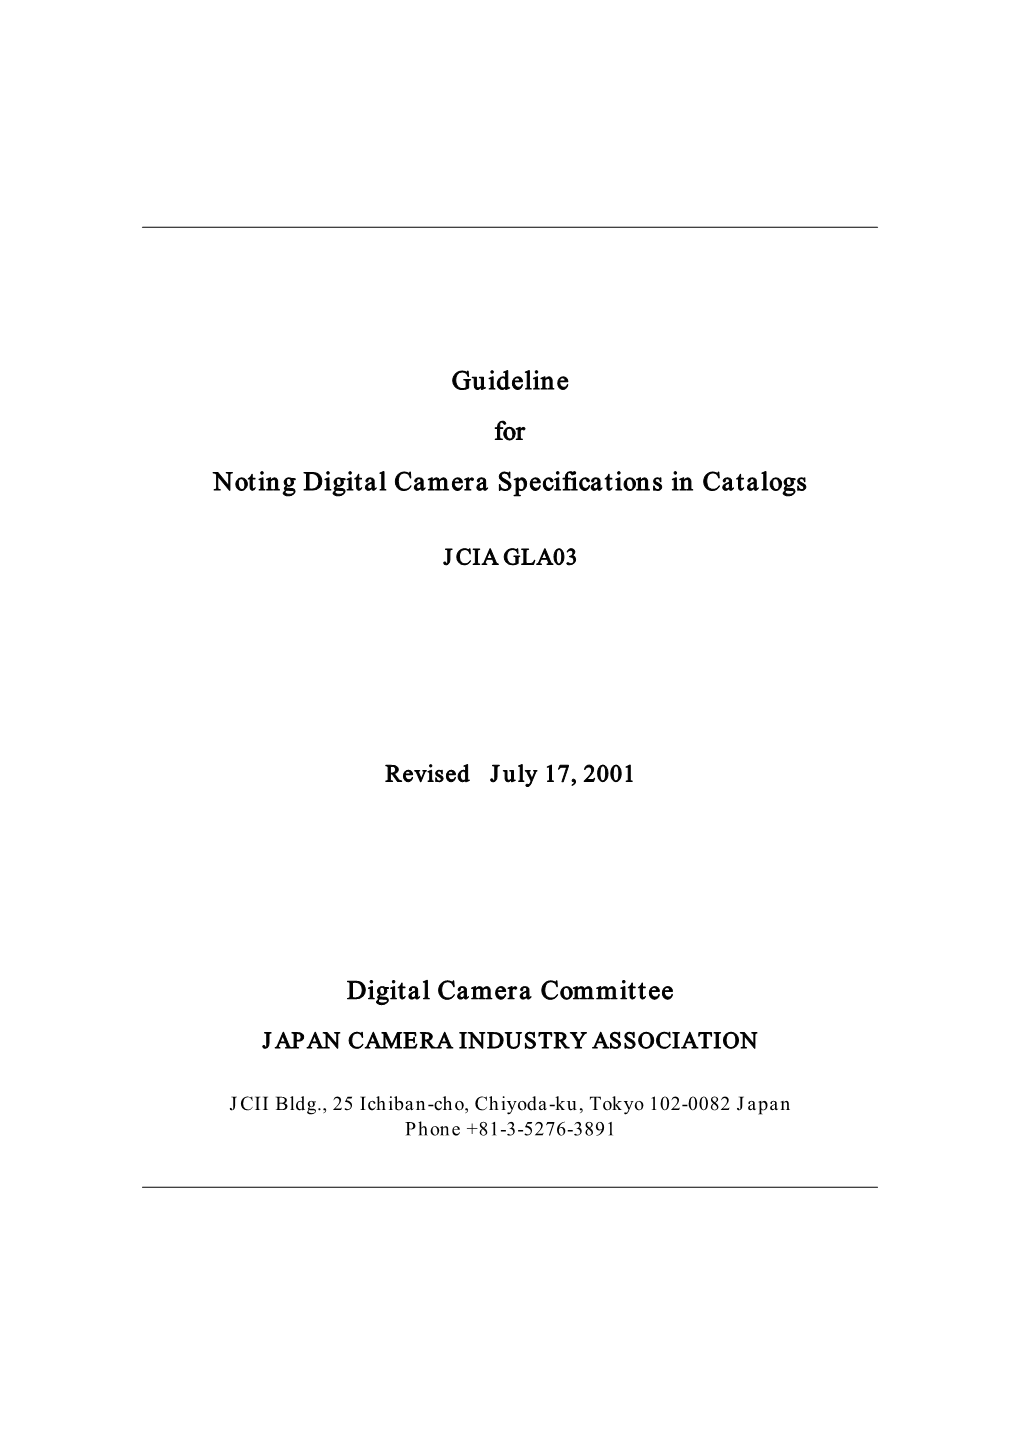 Guideline for Noting Digital Camera Specifications in Catalogs Digital Camera Committee